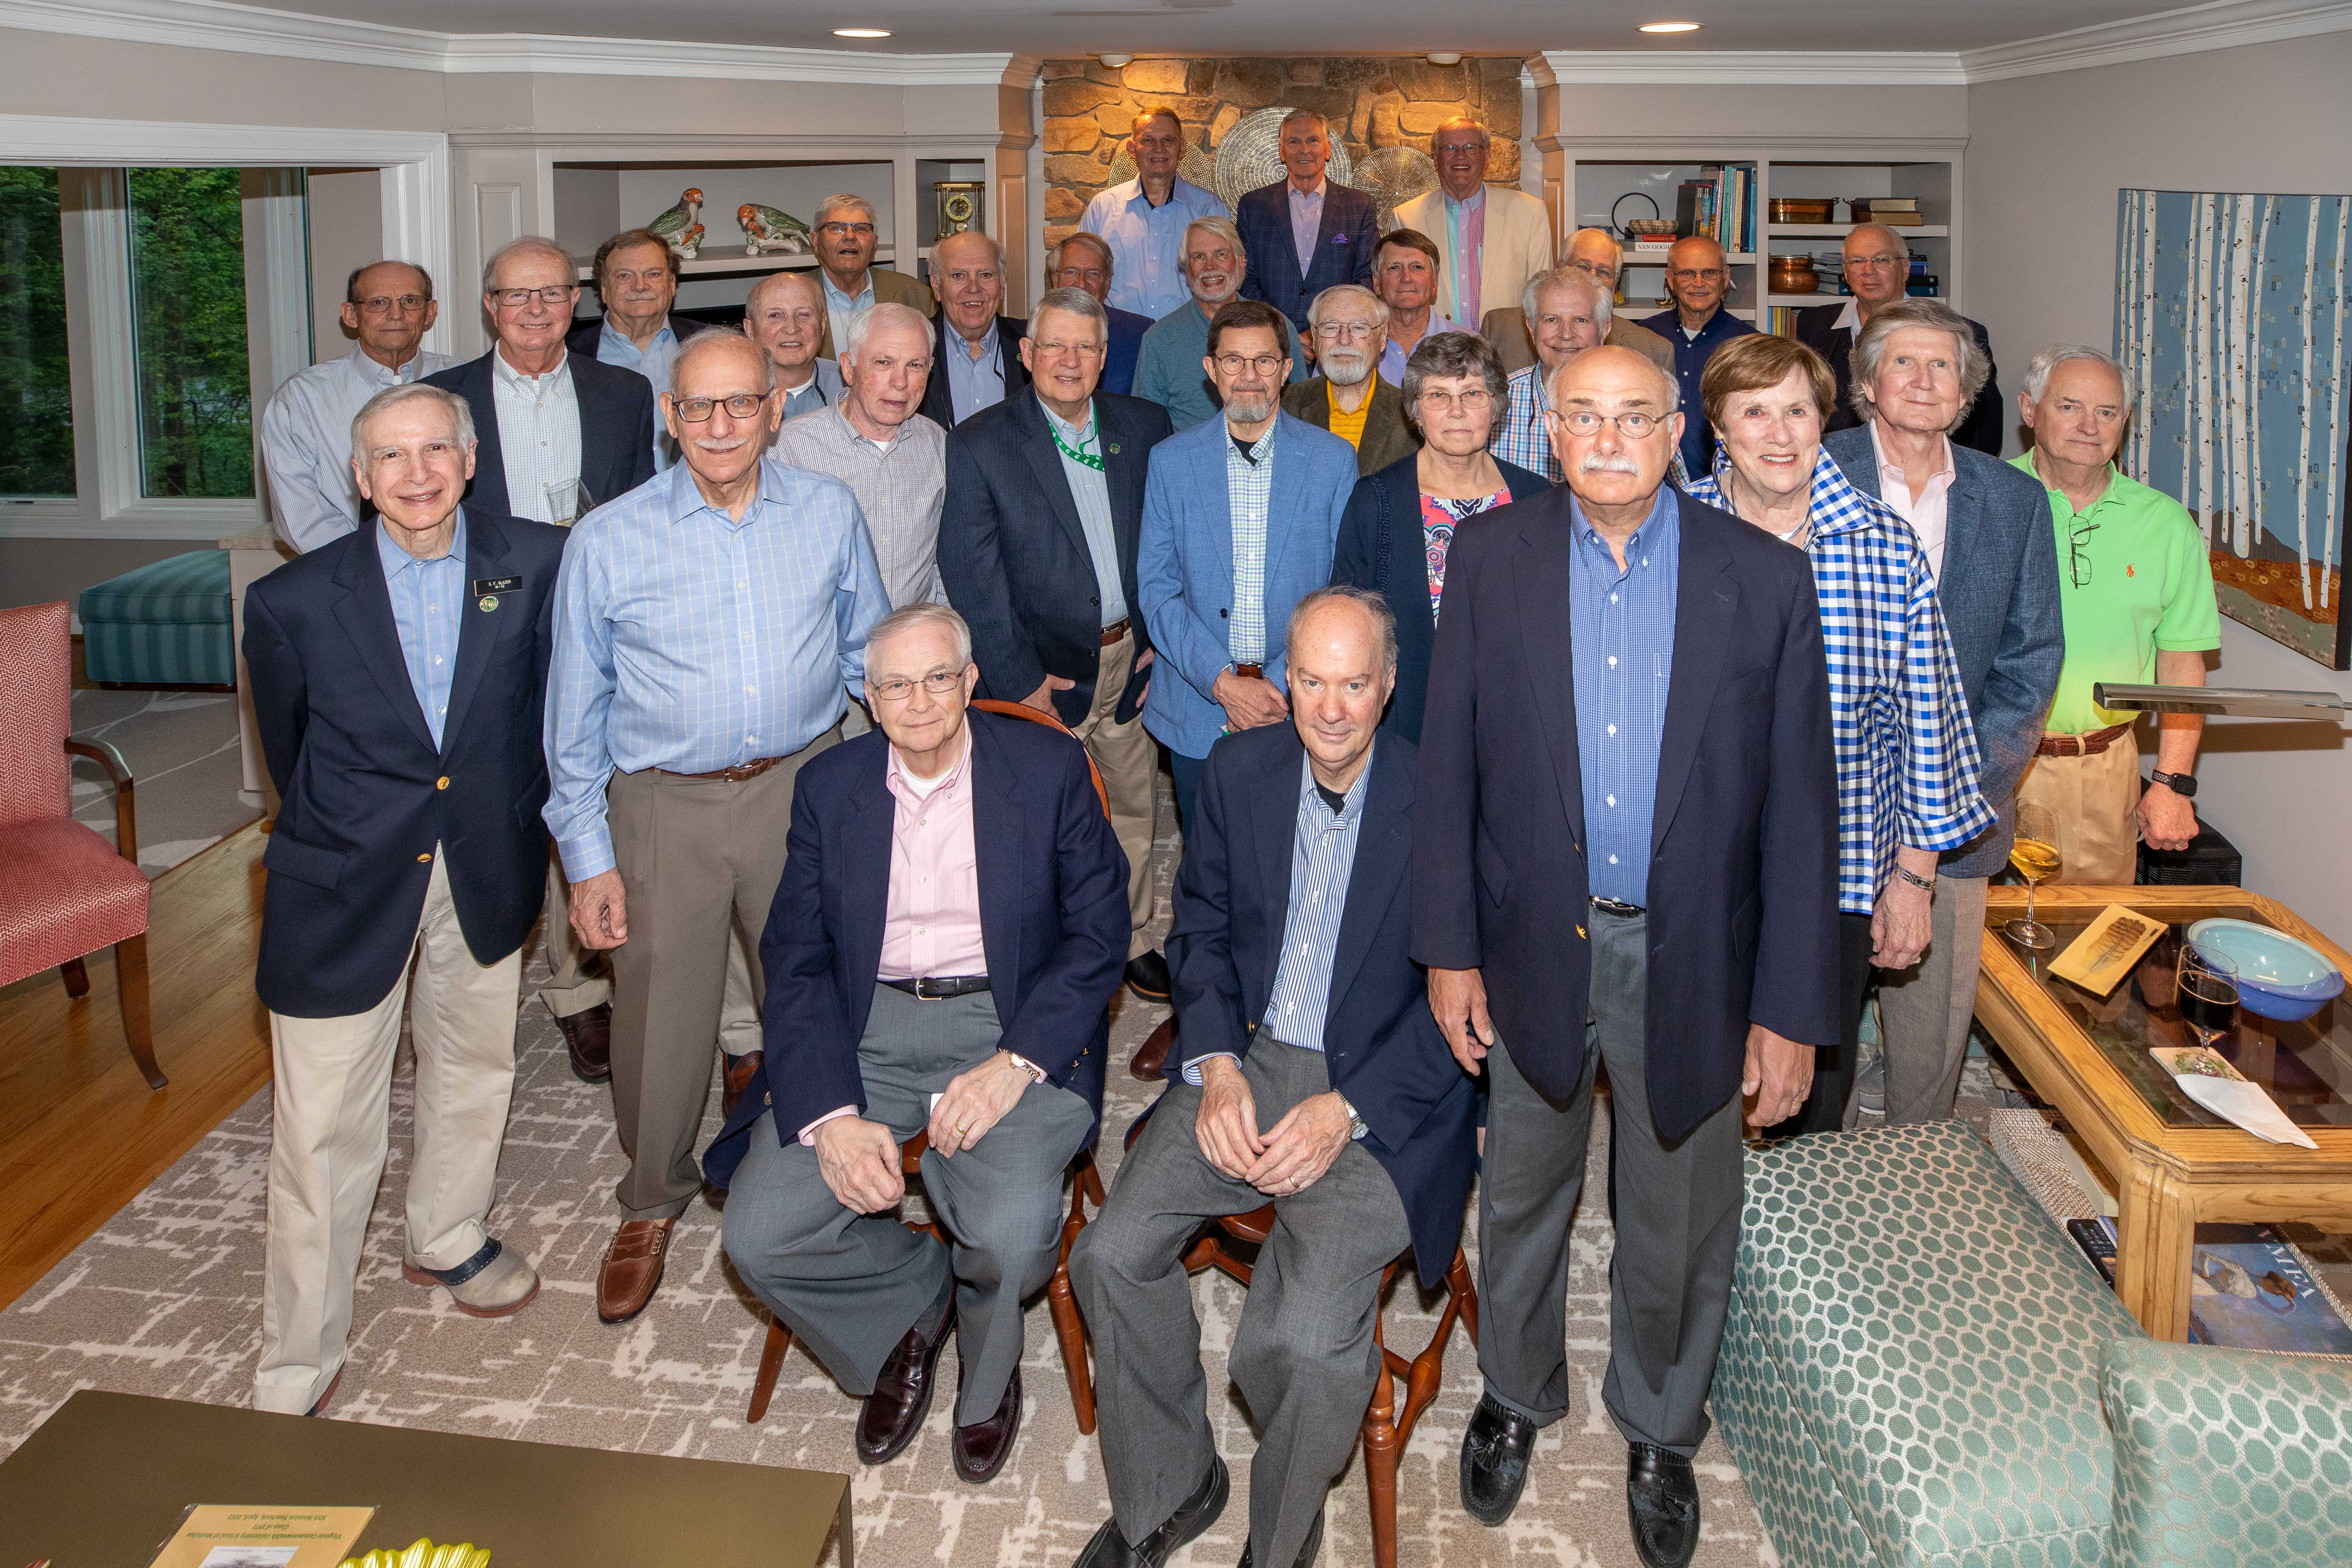 Dawn G. Mueller, M'72, H'75, F'77 (fourth from right in blue-checked jacket), spearheaded a project to endow the Class of 1972 Scholarship by their 50th Reunion. In April 2022, she and her classmates met their goal, 